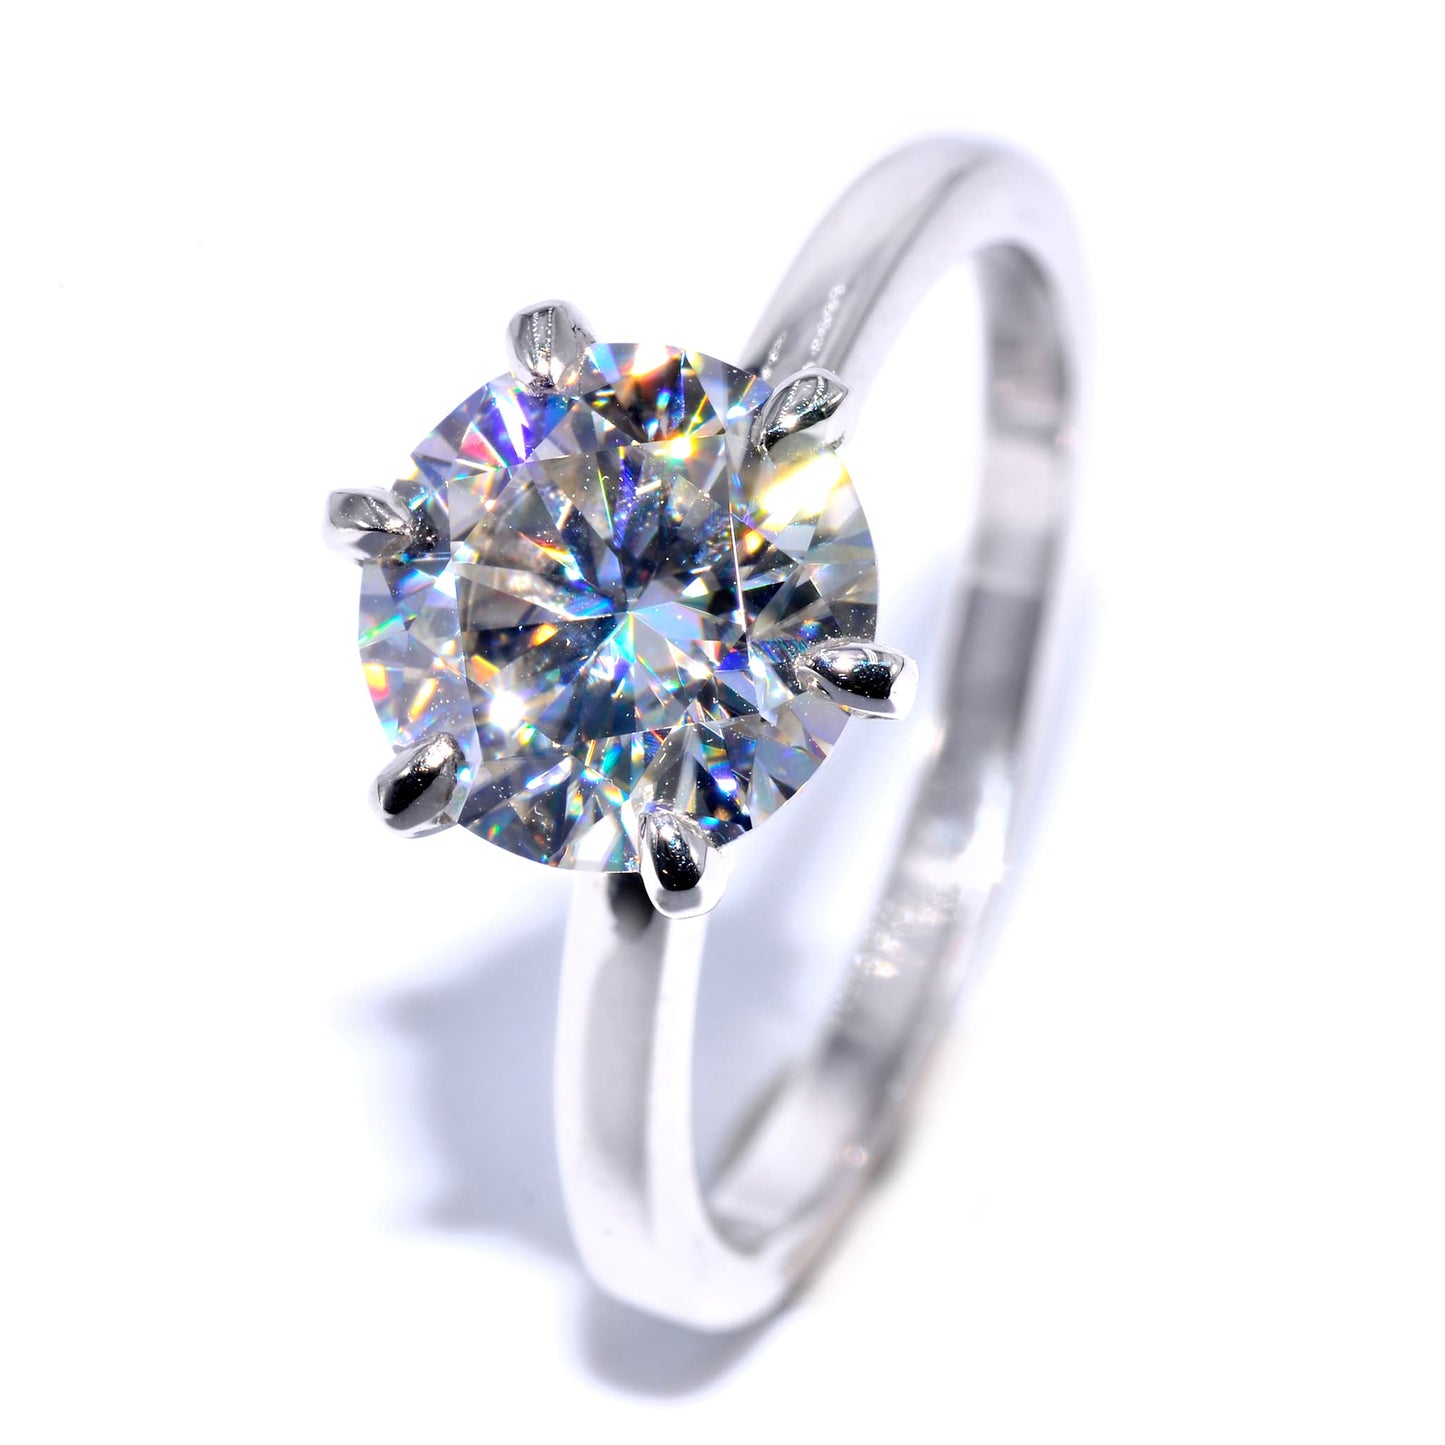 Engagement ring in 18K white gold